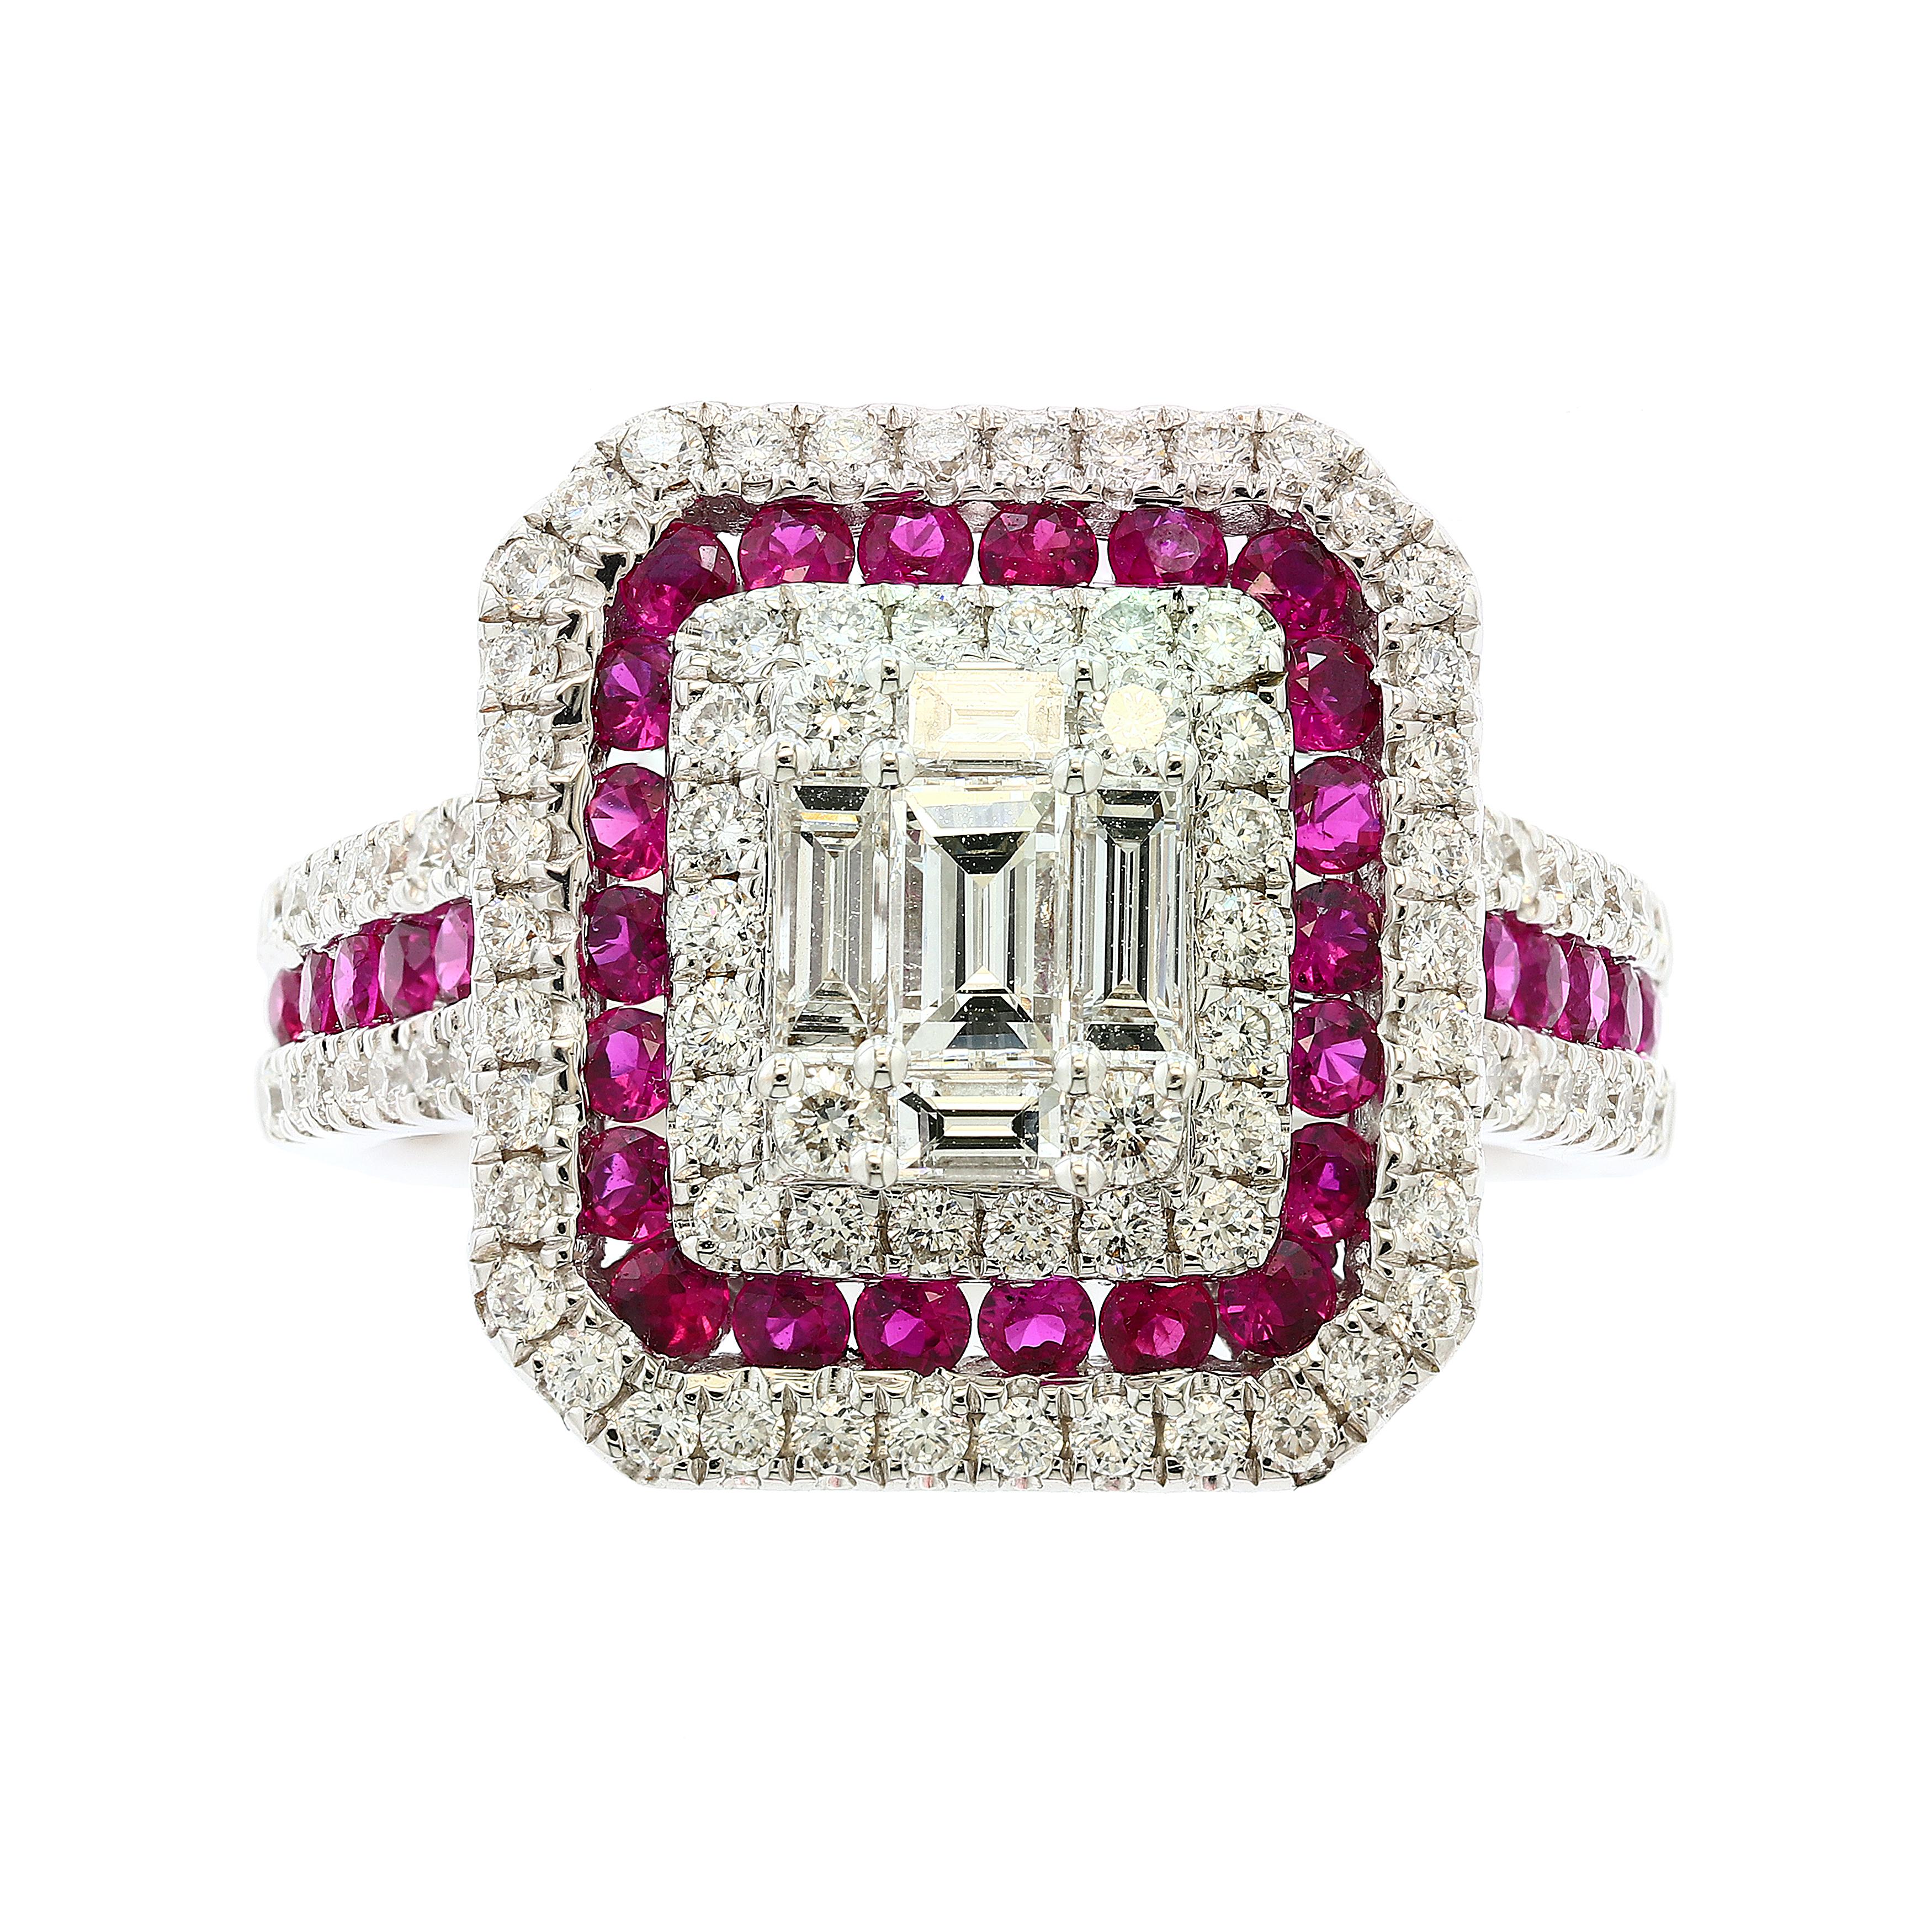 This cocktail ring  features 32 natural rubies weighing 0.73 carats total and 92  round brilliant diamonds weighing 0.367 carats total. Also there are 5 baguette diamonds in the center weighing 0.43 carat in total. The rubies have a dark purplish